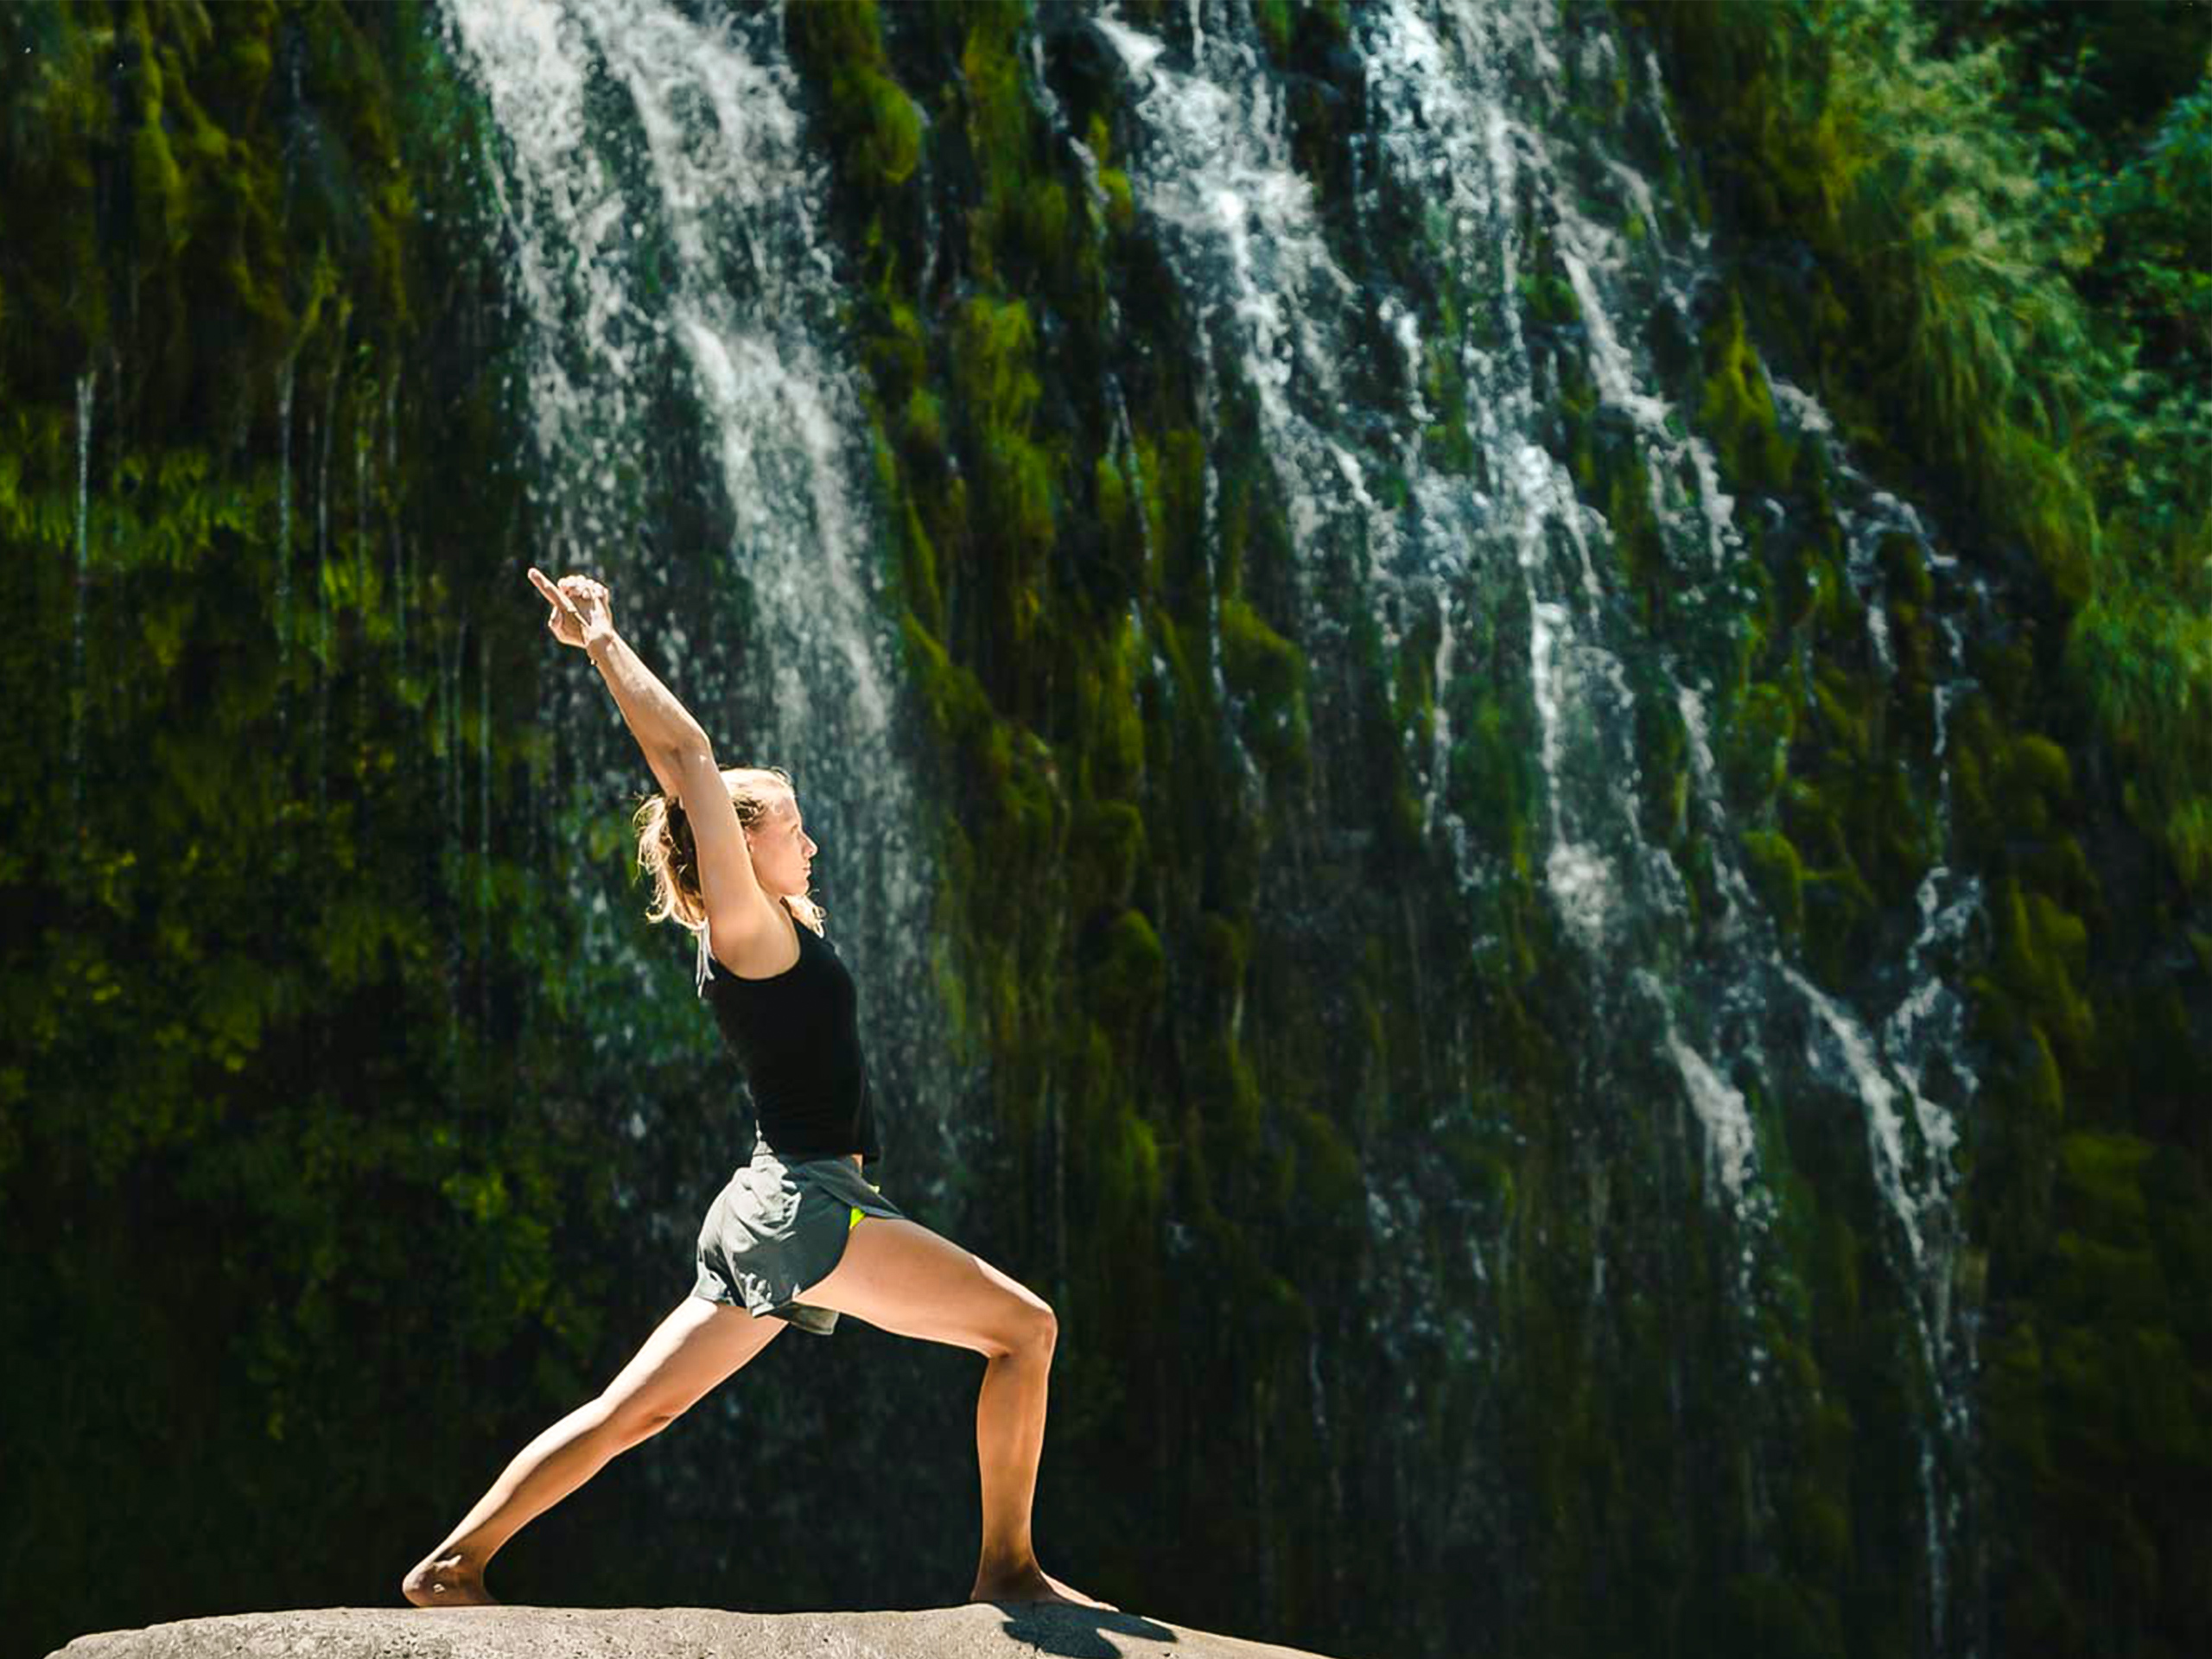 Yoga Under the Waterfall